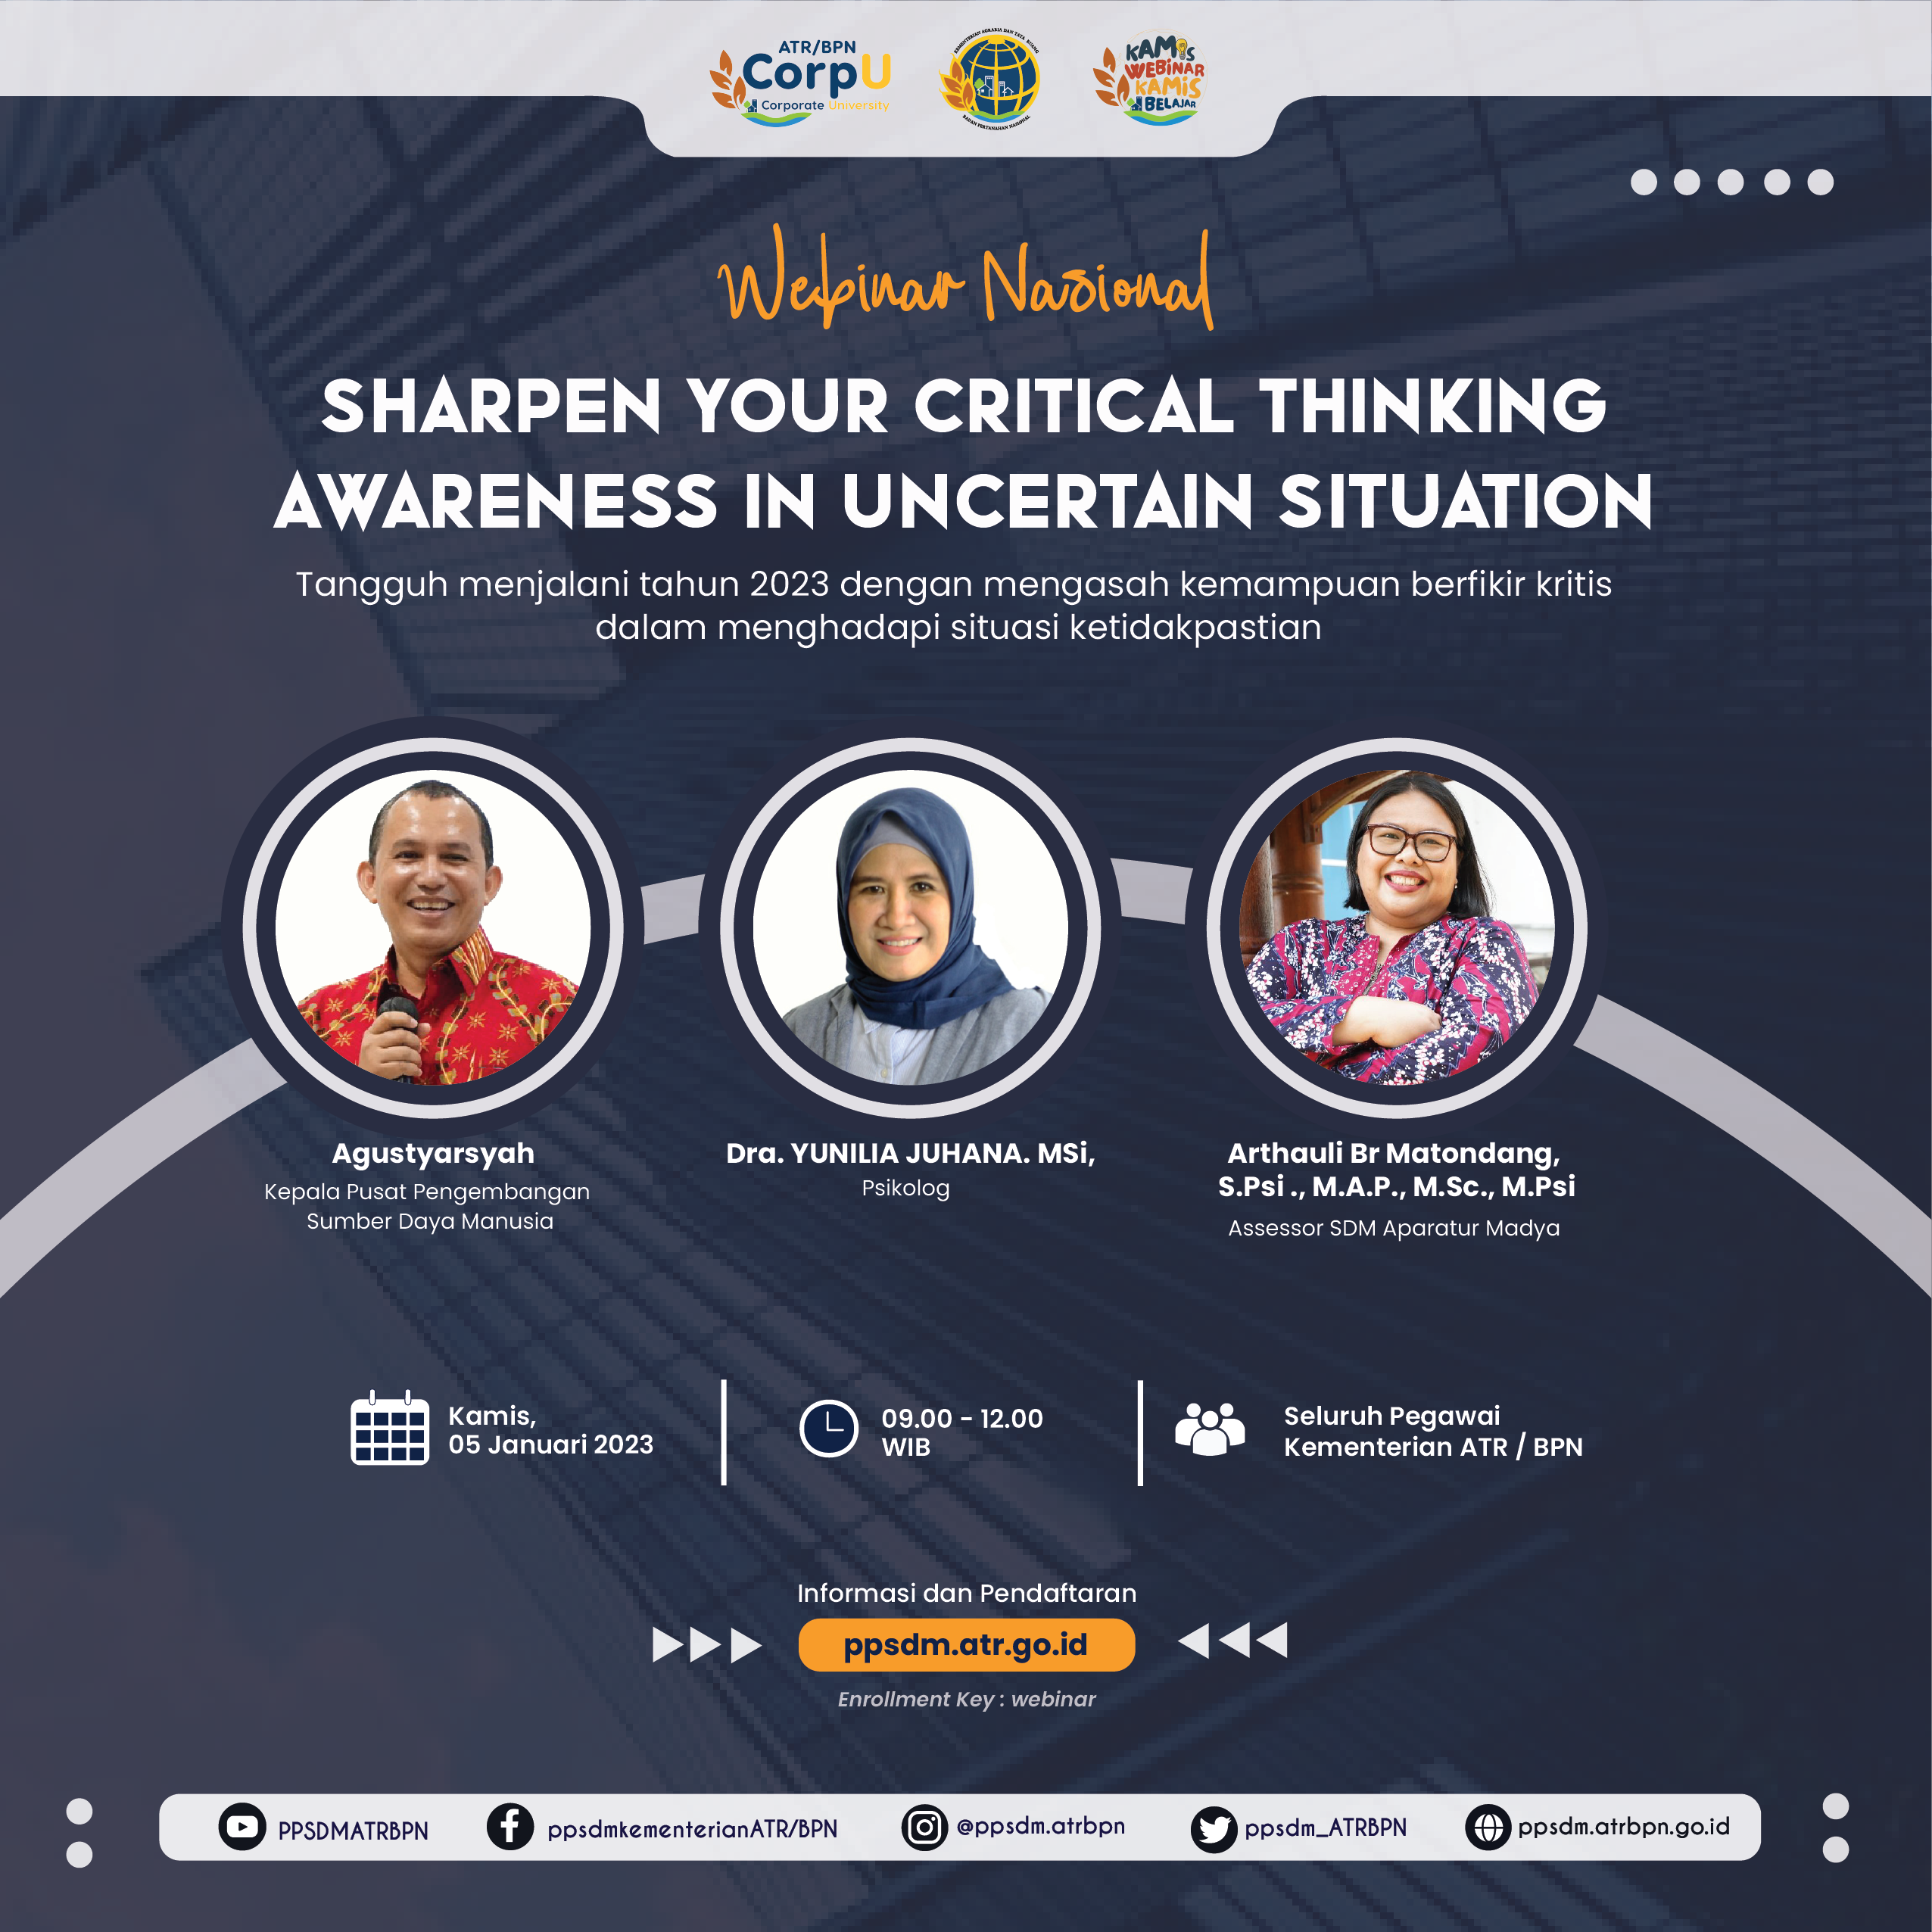 Webinar Nasional Sharpen Your Critical Thinking Awareness in uncertain situations